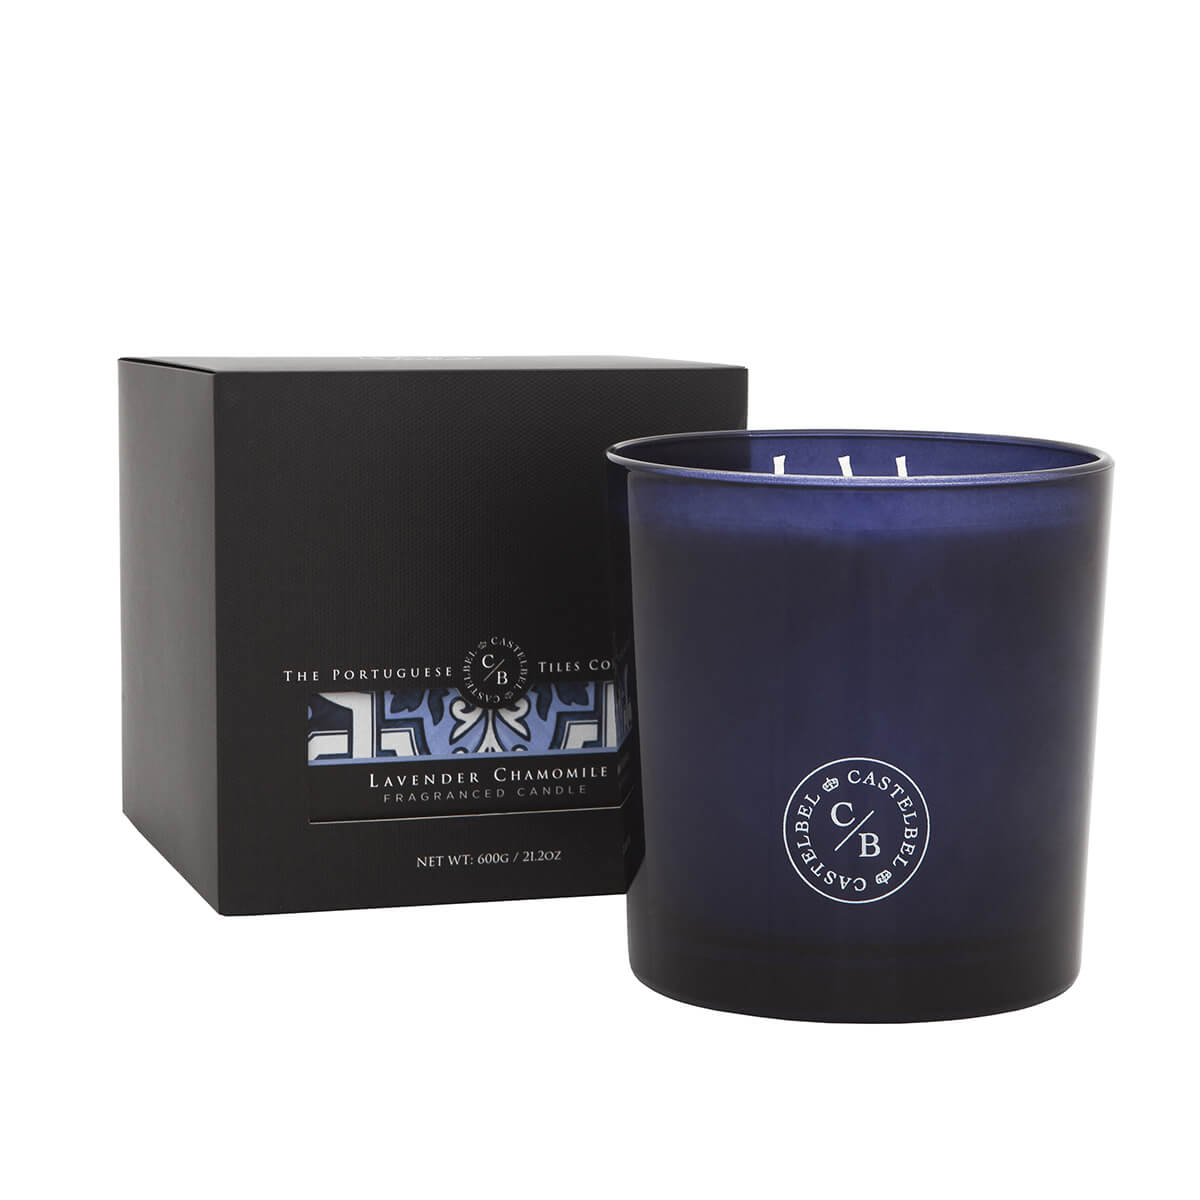 Lavender Chamomile Aromatic 3-Wick Candle 600g | Castelbel